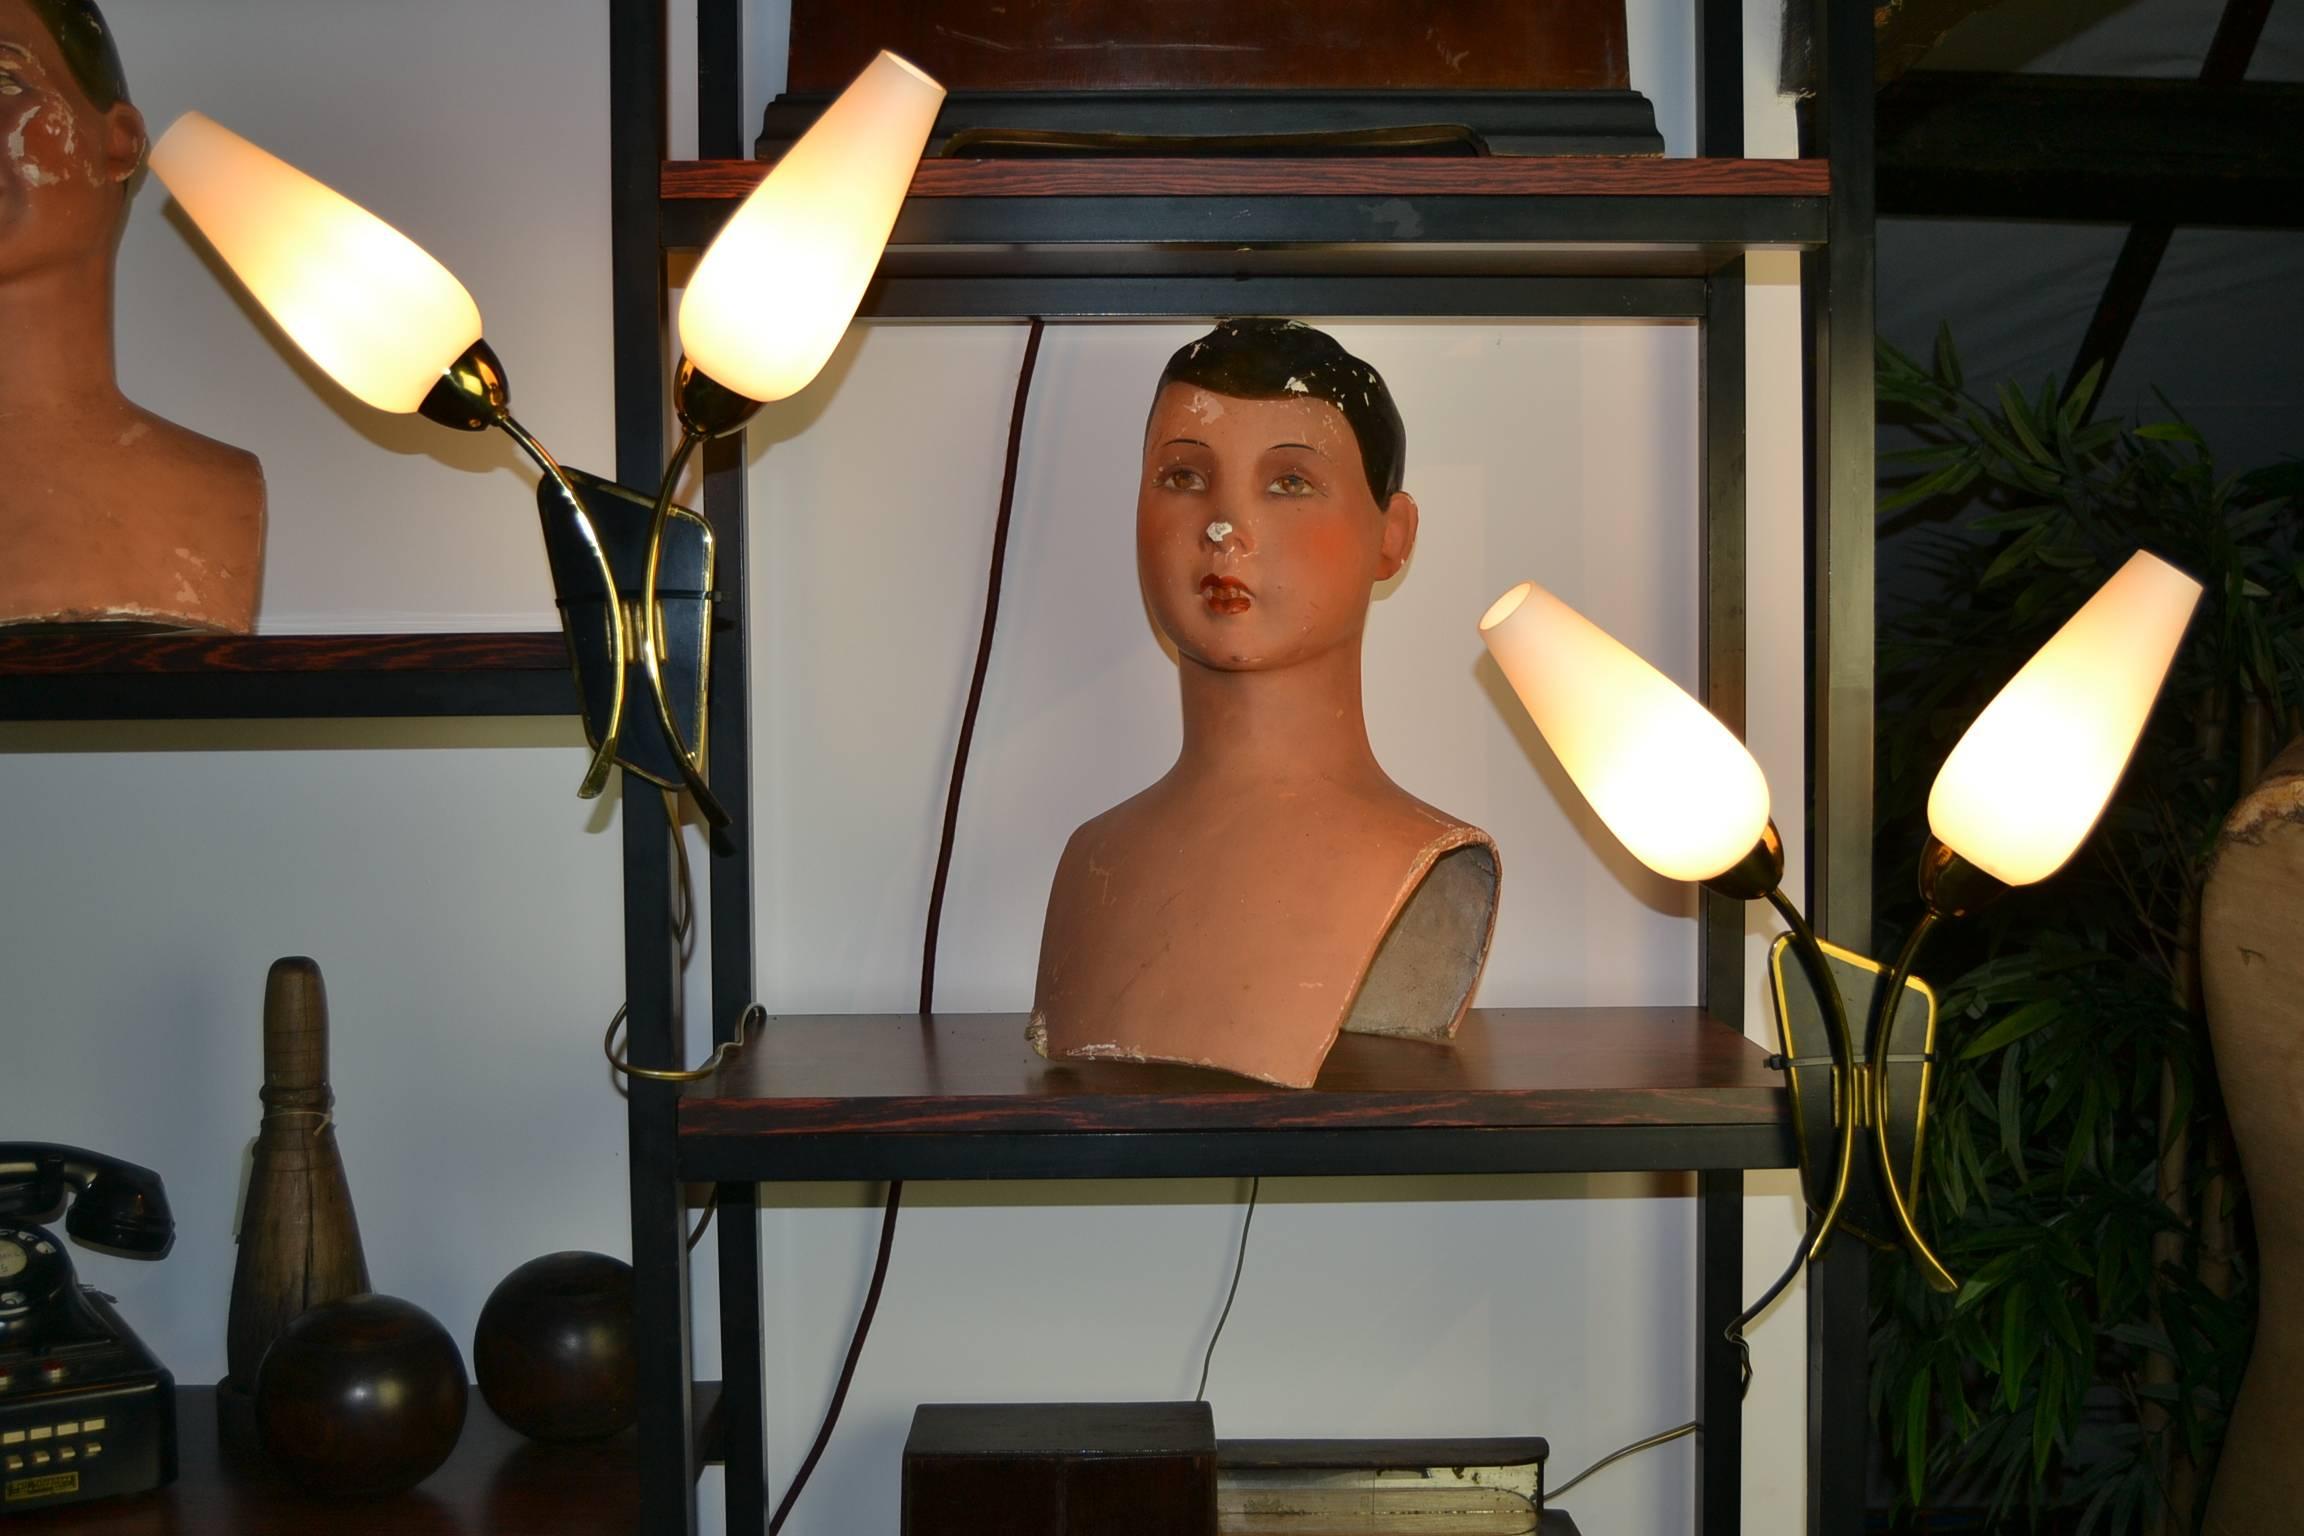 Stylish pair of vintage French sconces, wall lights, circa 1950.
Frosted glass shades, brass and black laquered backplate.
Mid-Century Modern or Stilnovo style.
Price is for the pair.